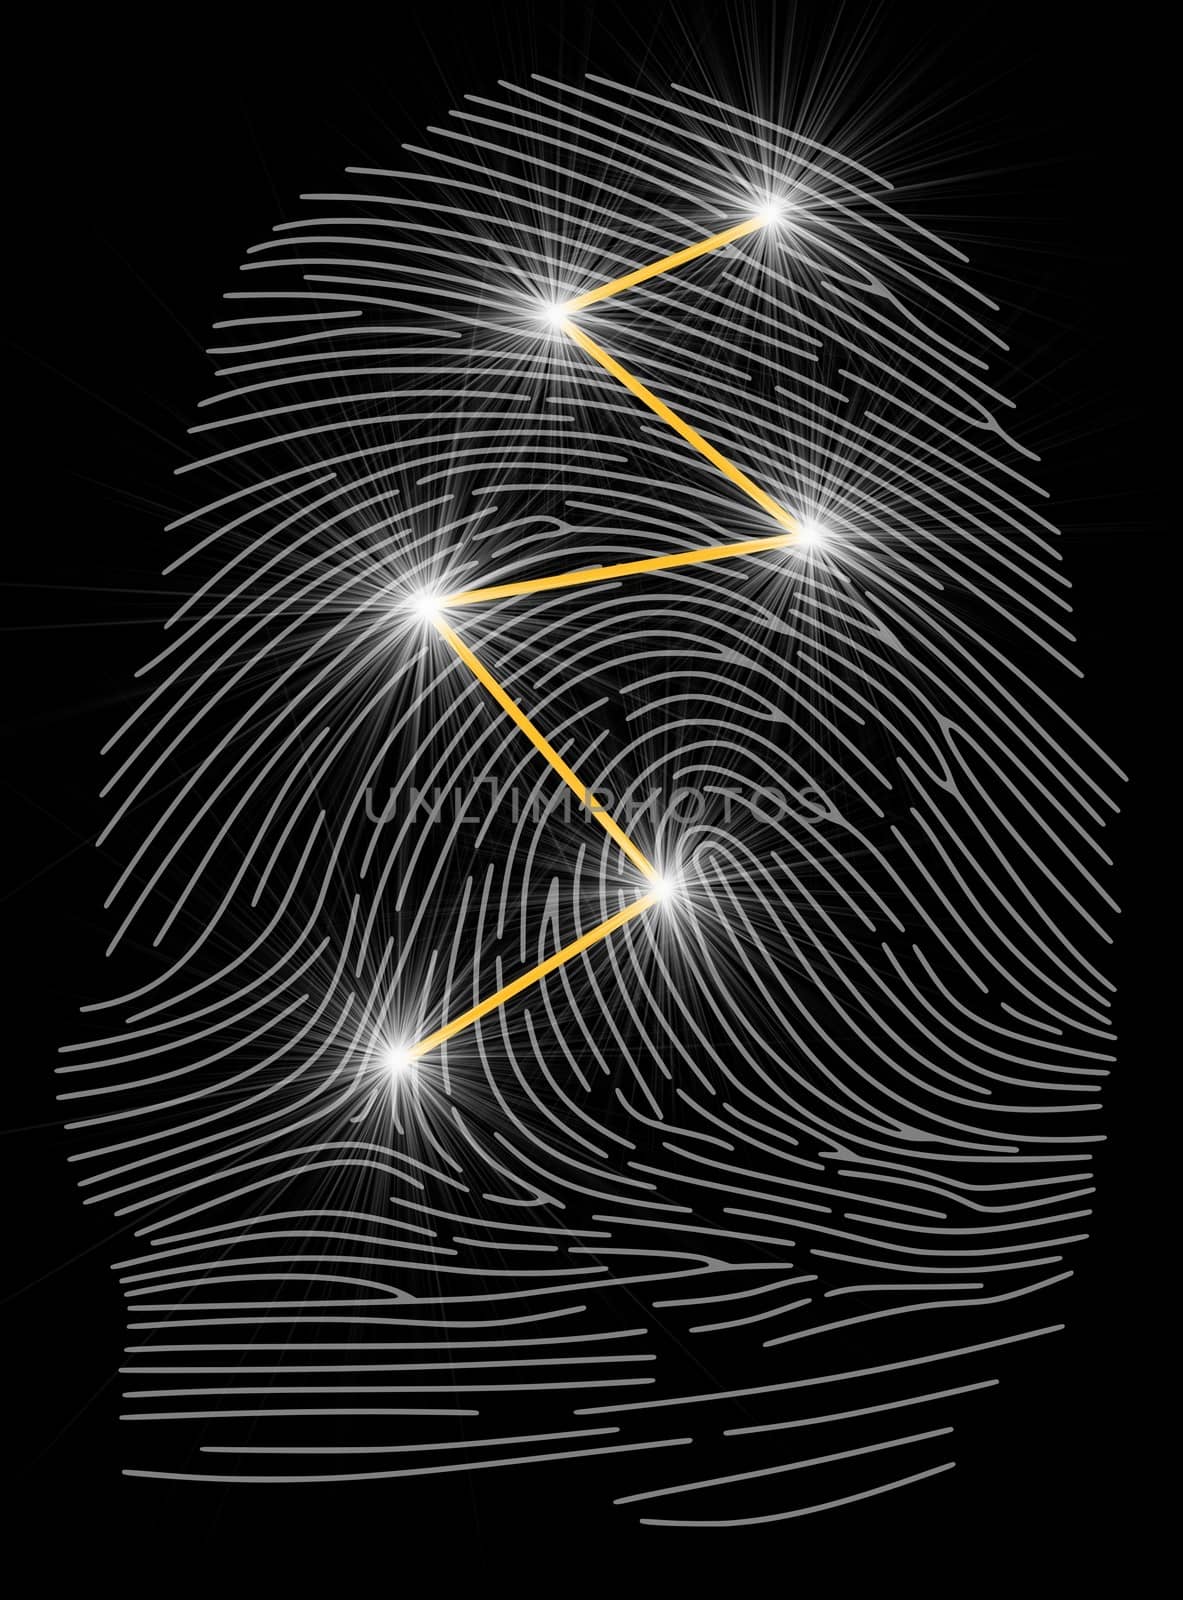 Illustration of a fingerprint with connections